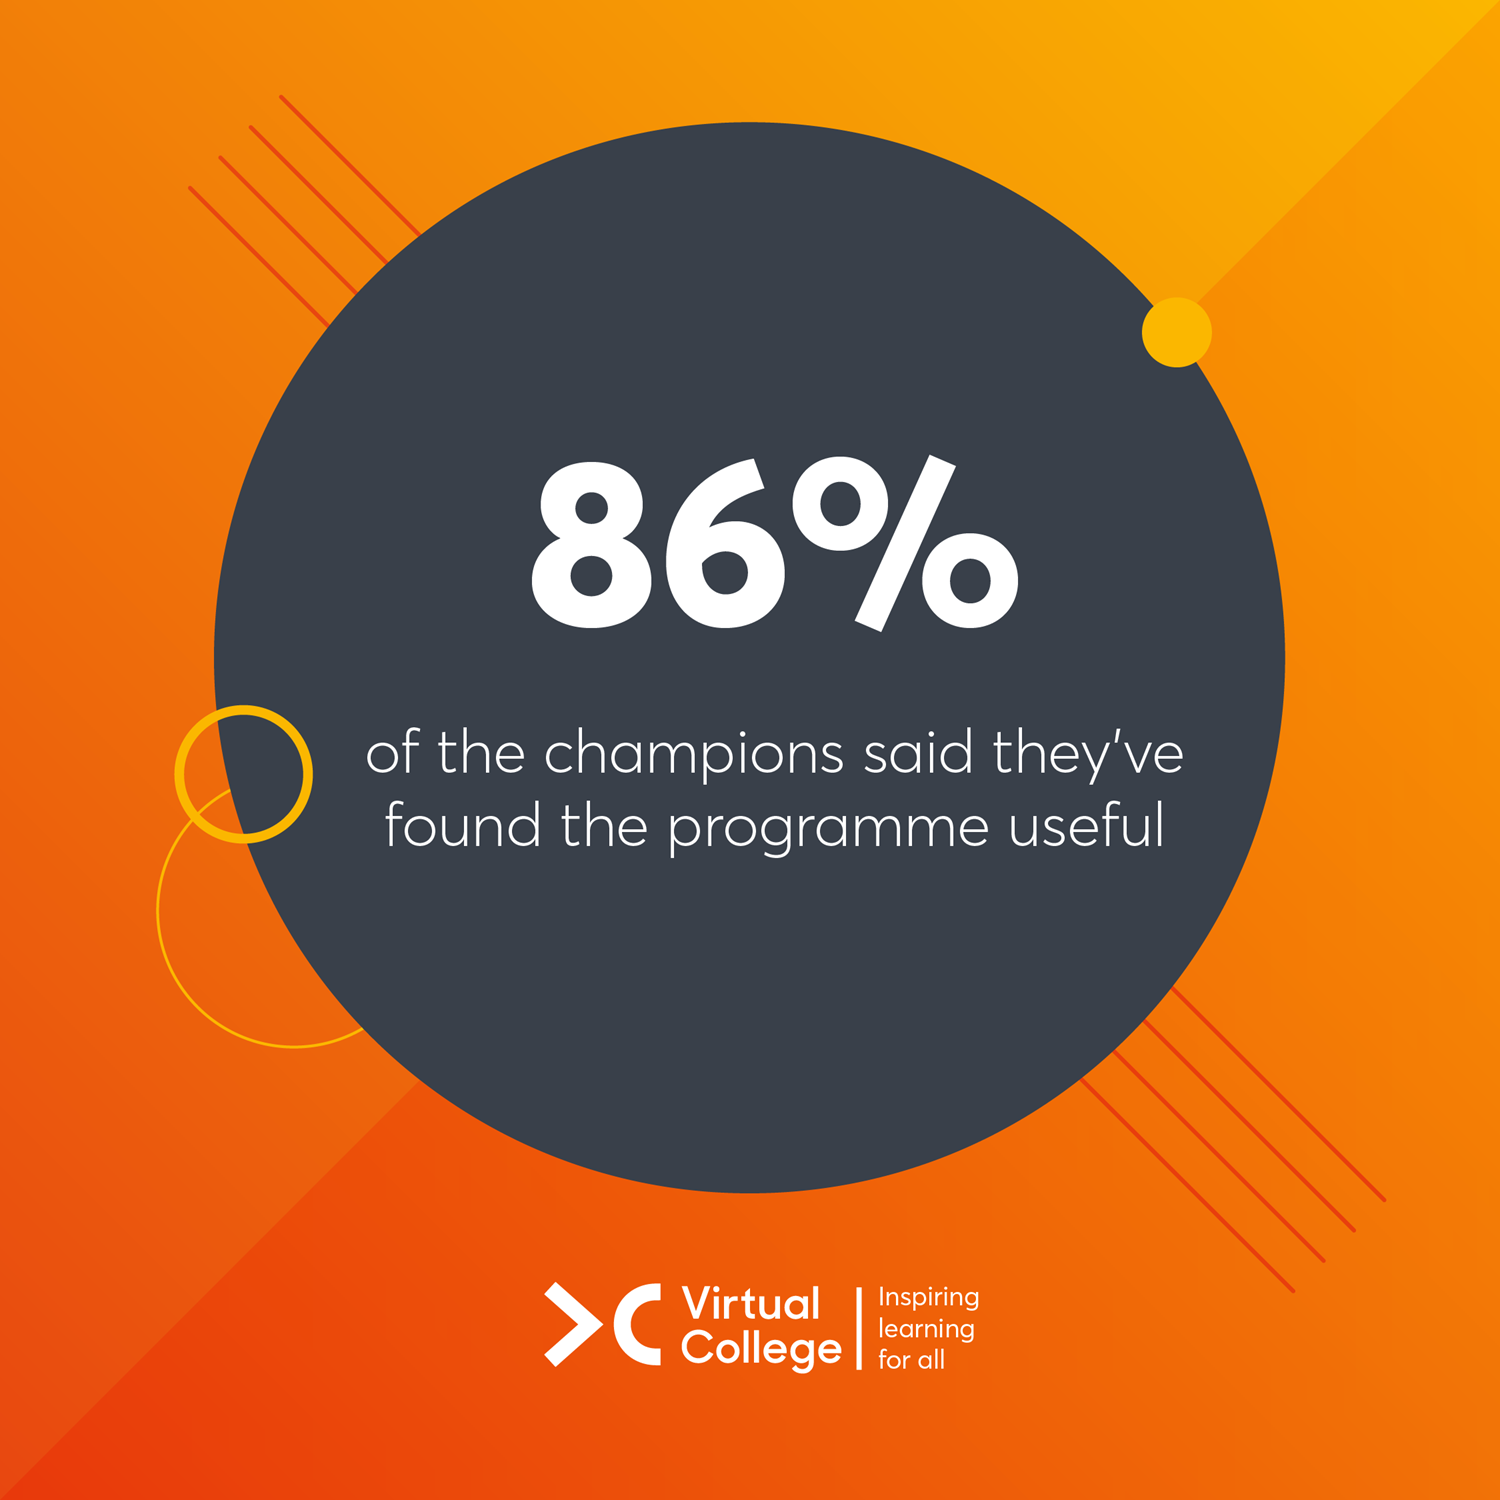 86% of the champions said they've found the programme useful